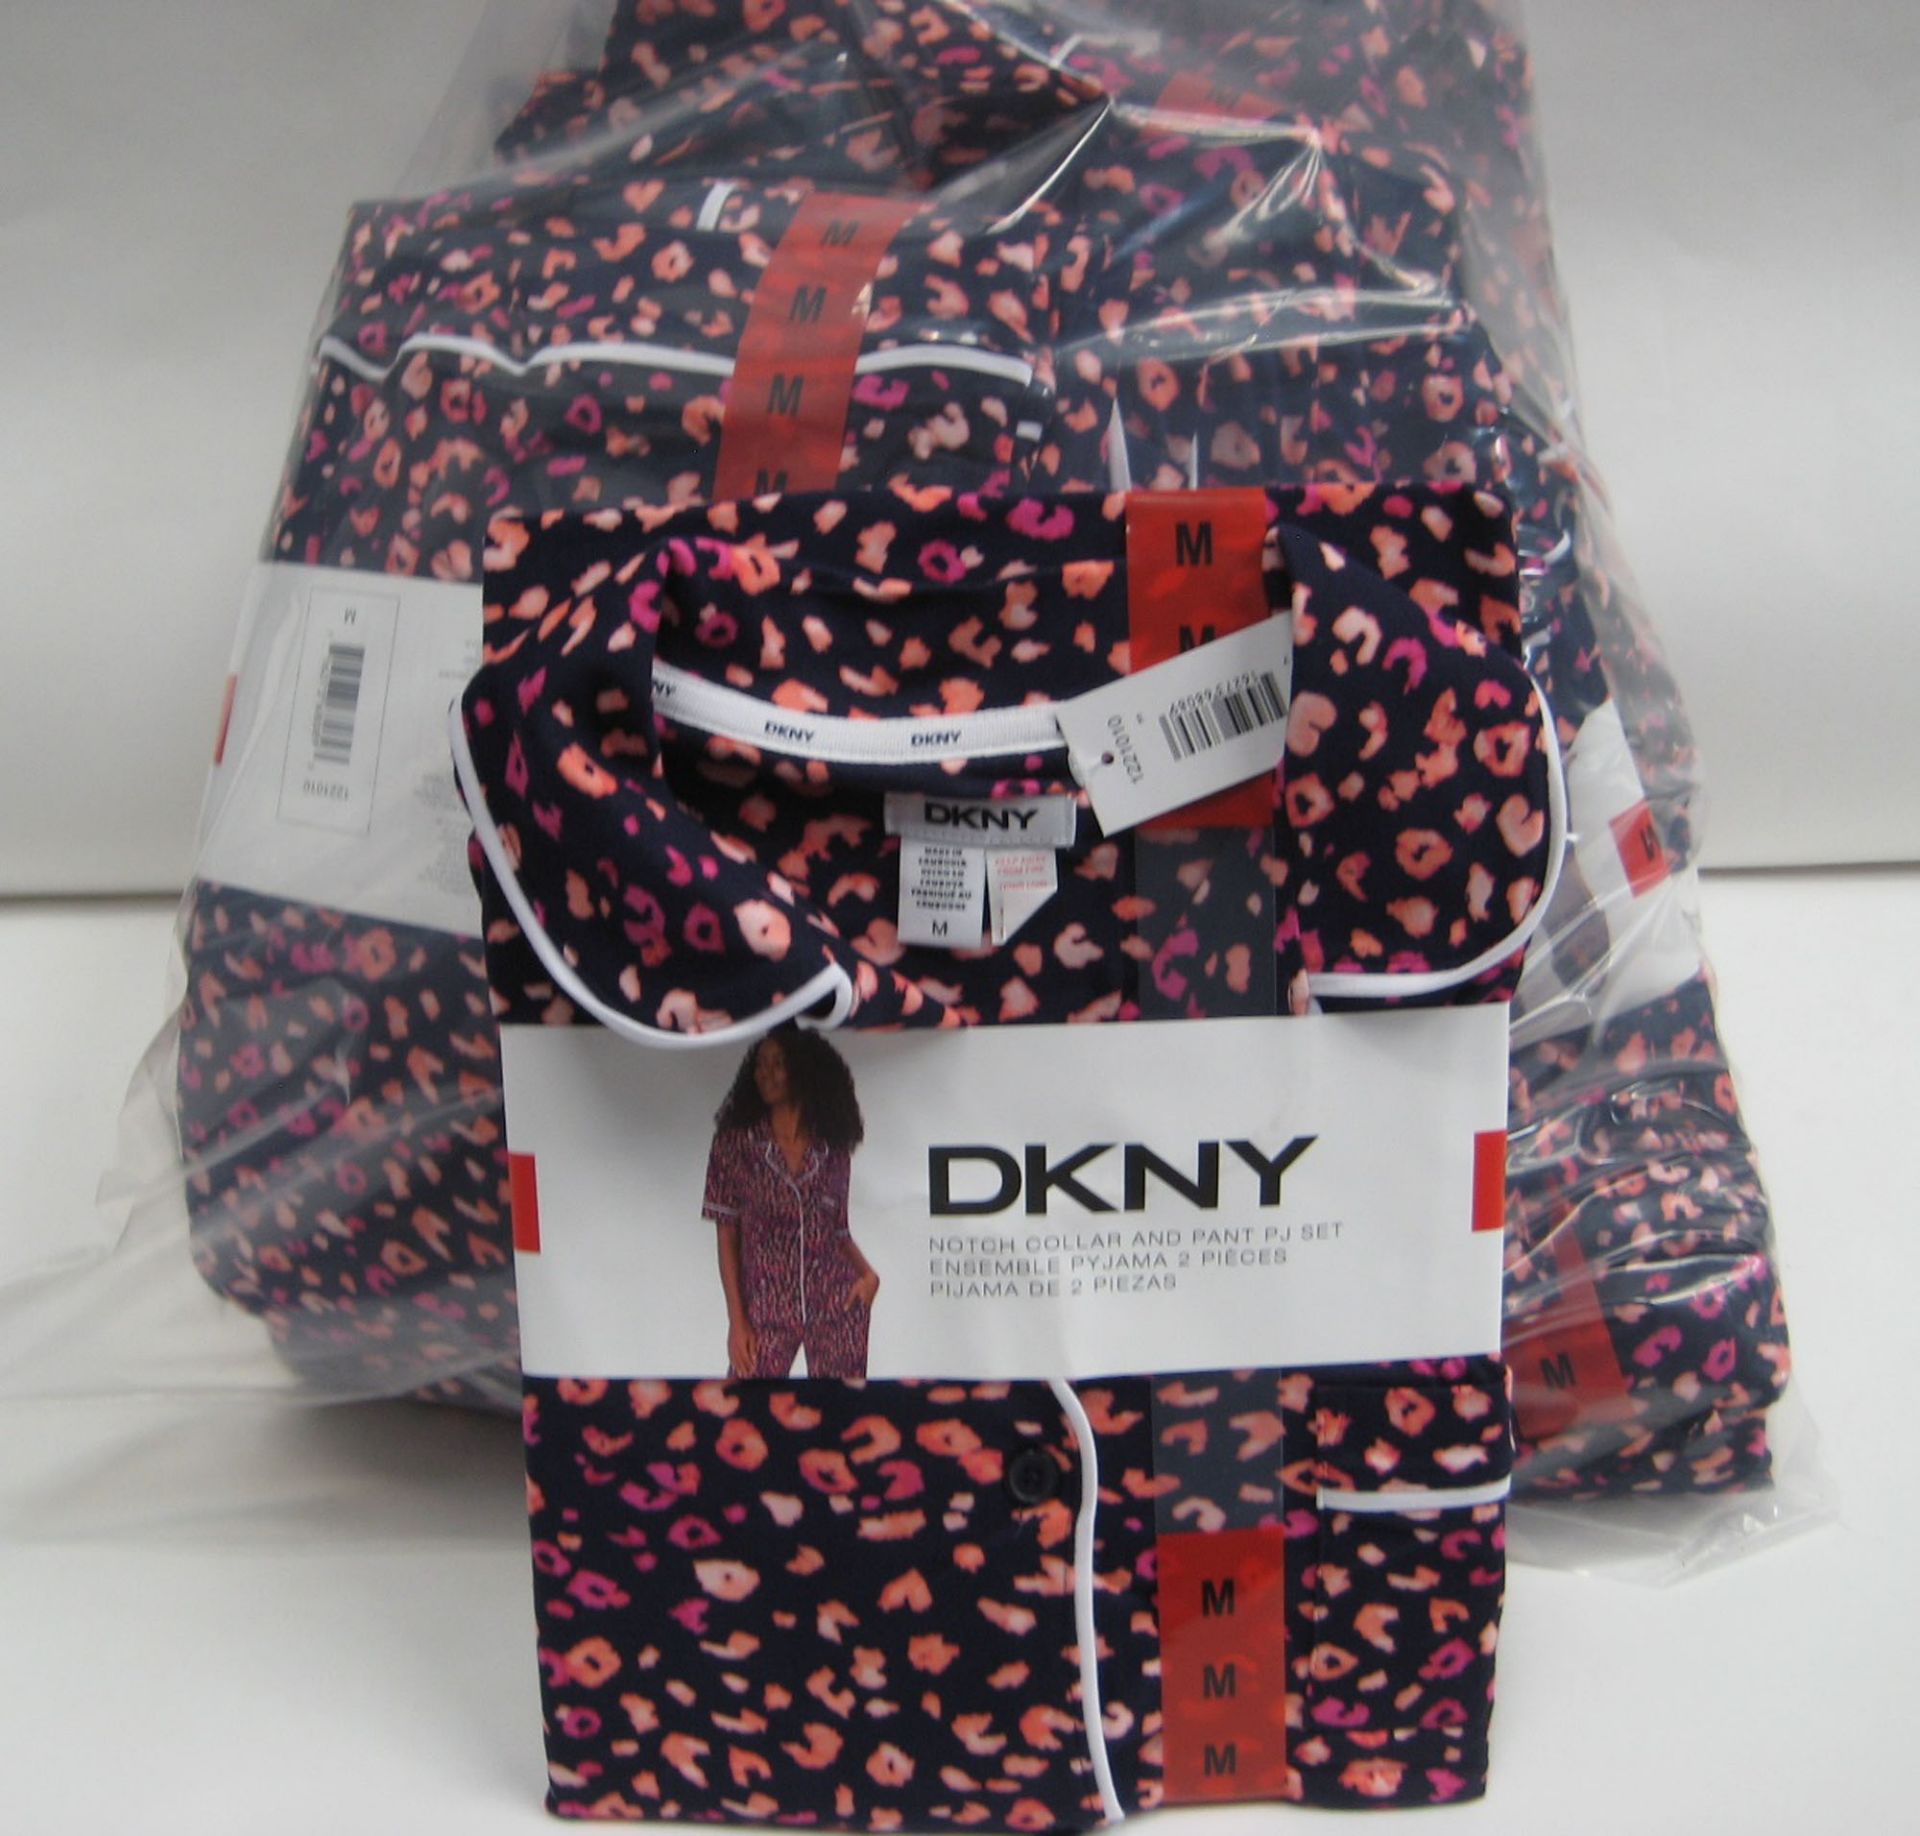 Bag containing approx 15 sets of ladies PJ's by DKNY with floral pink pattern